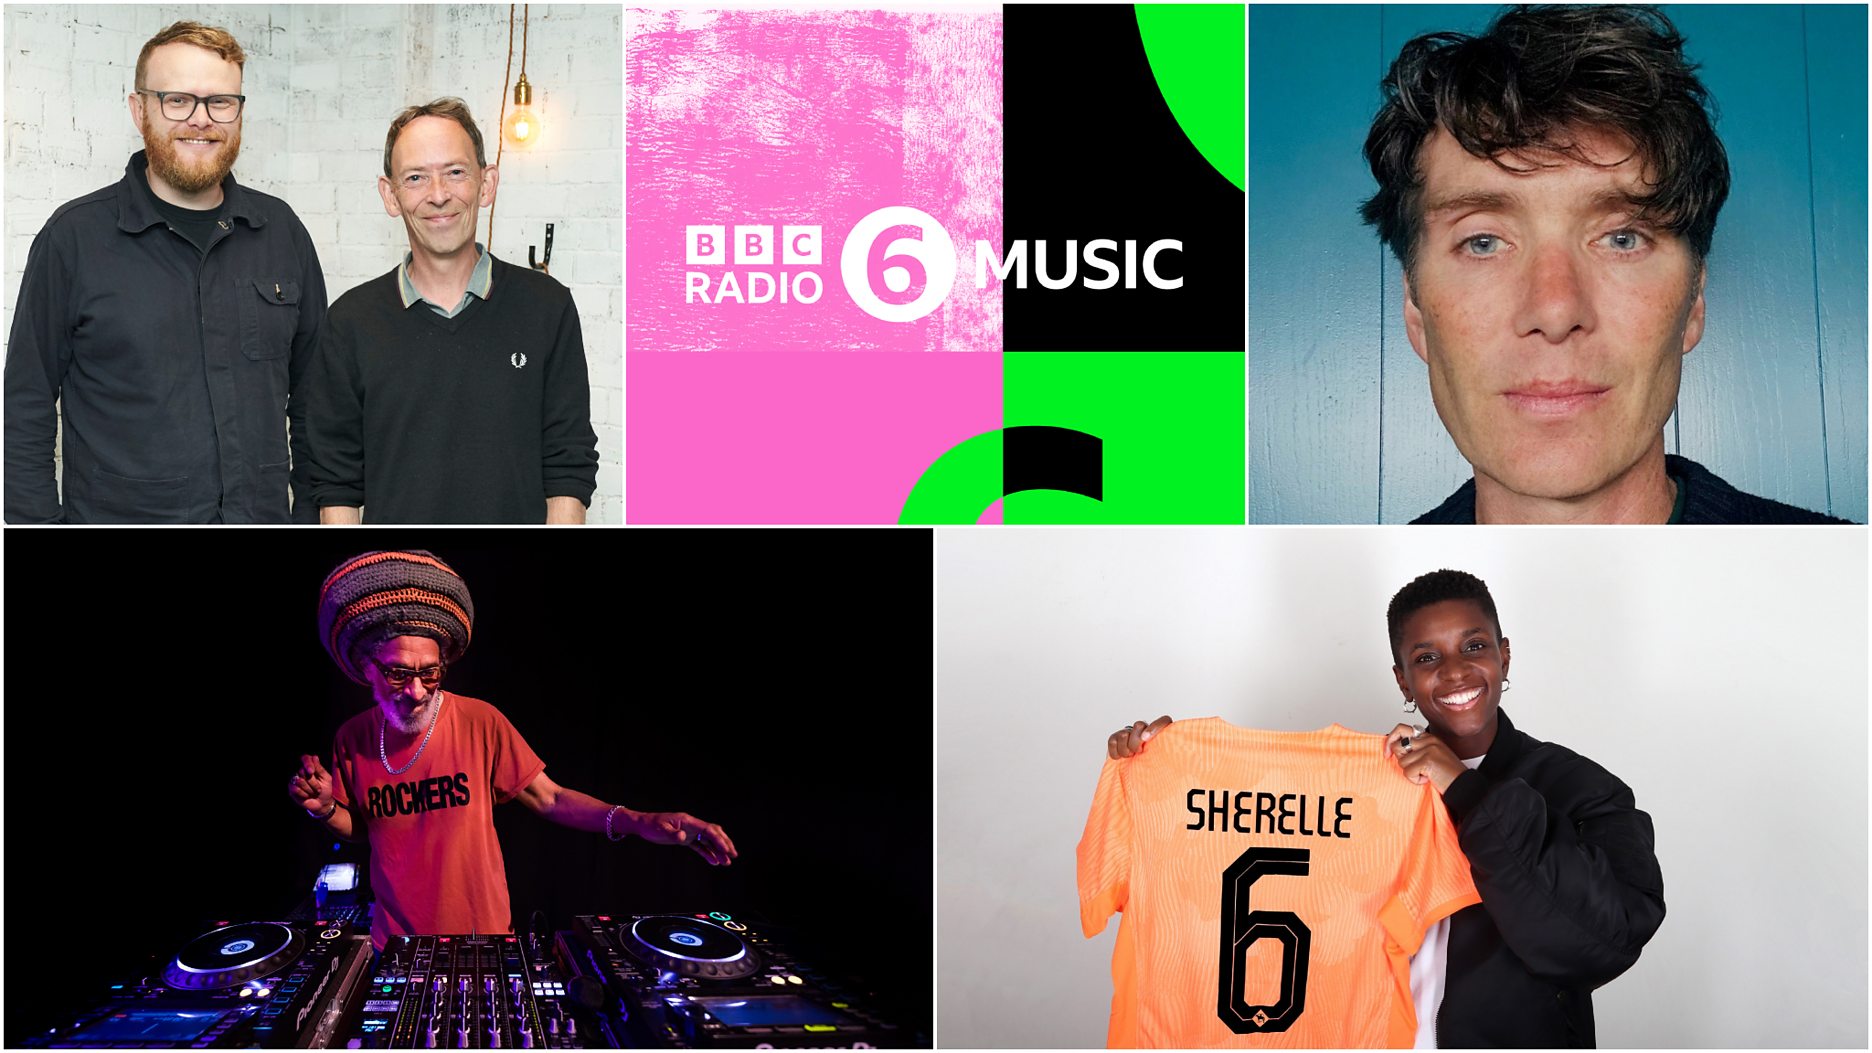 BBC Radio 6 Music announces autumn highlights and additions to the evening schedules